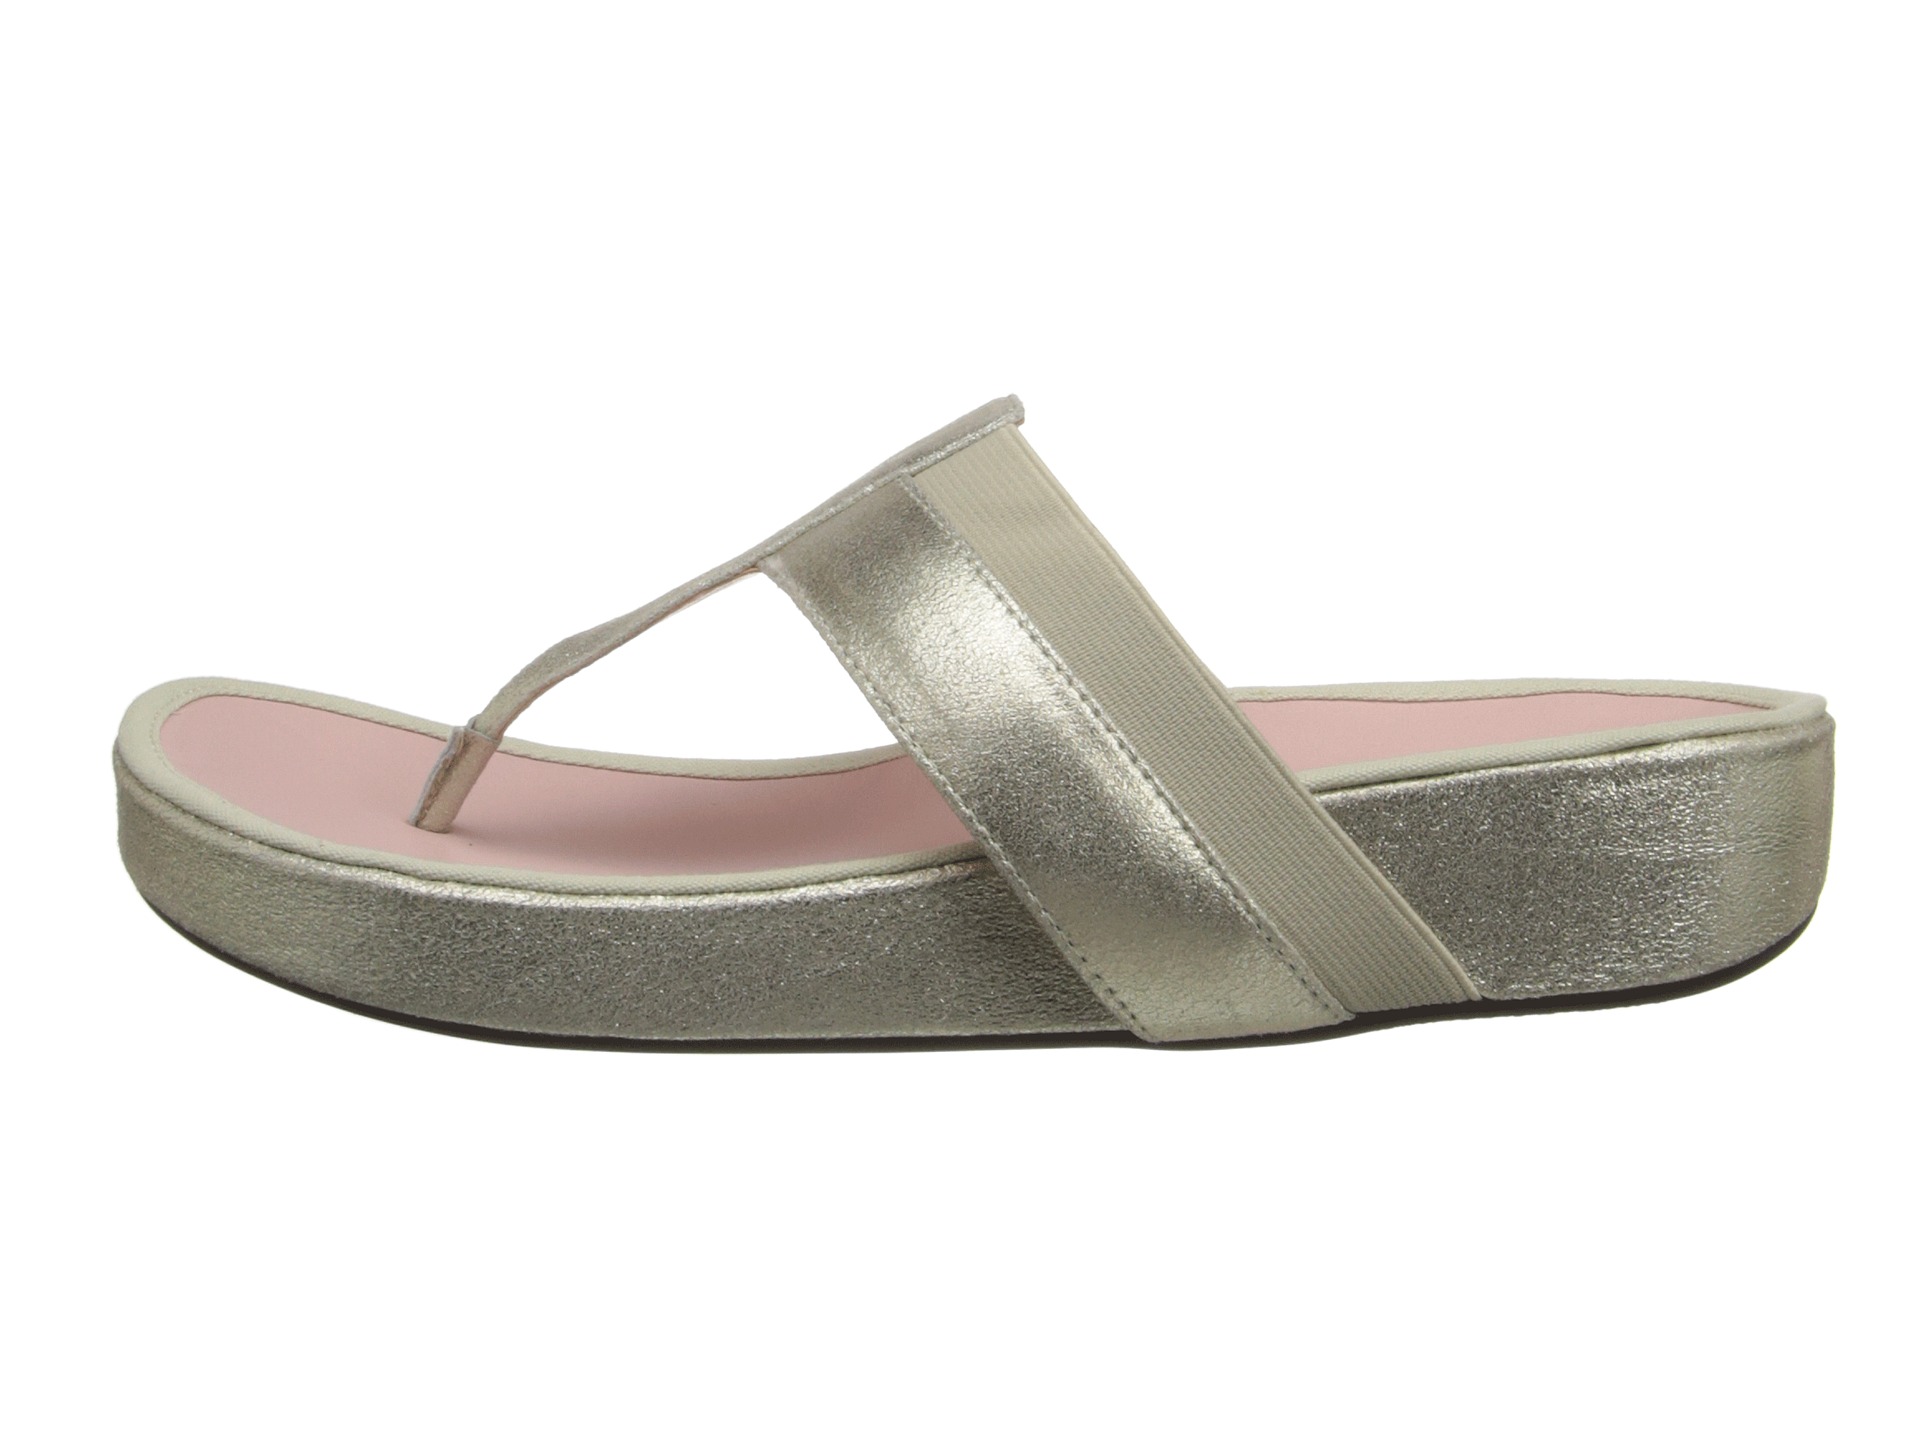 Taryn Rose August Soft Gold Metallic | Shipped Free at Zappos